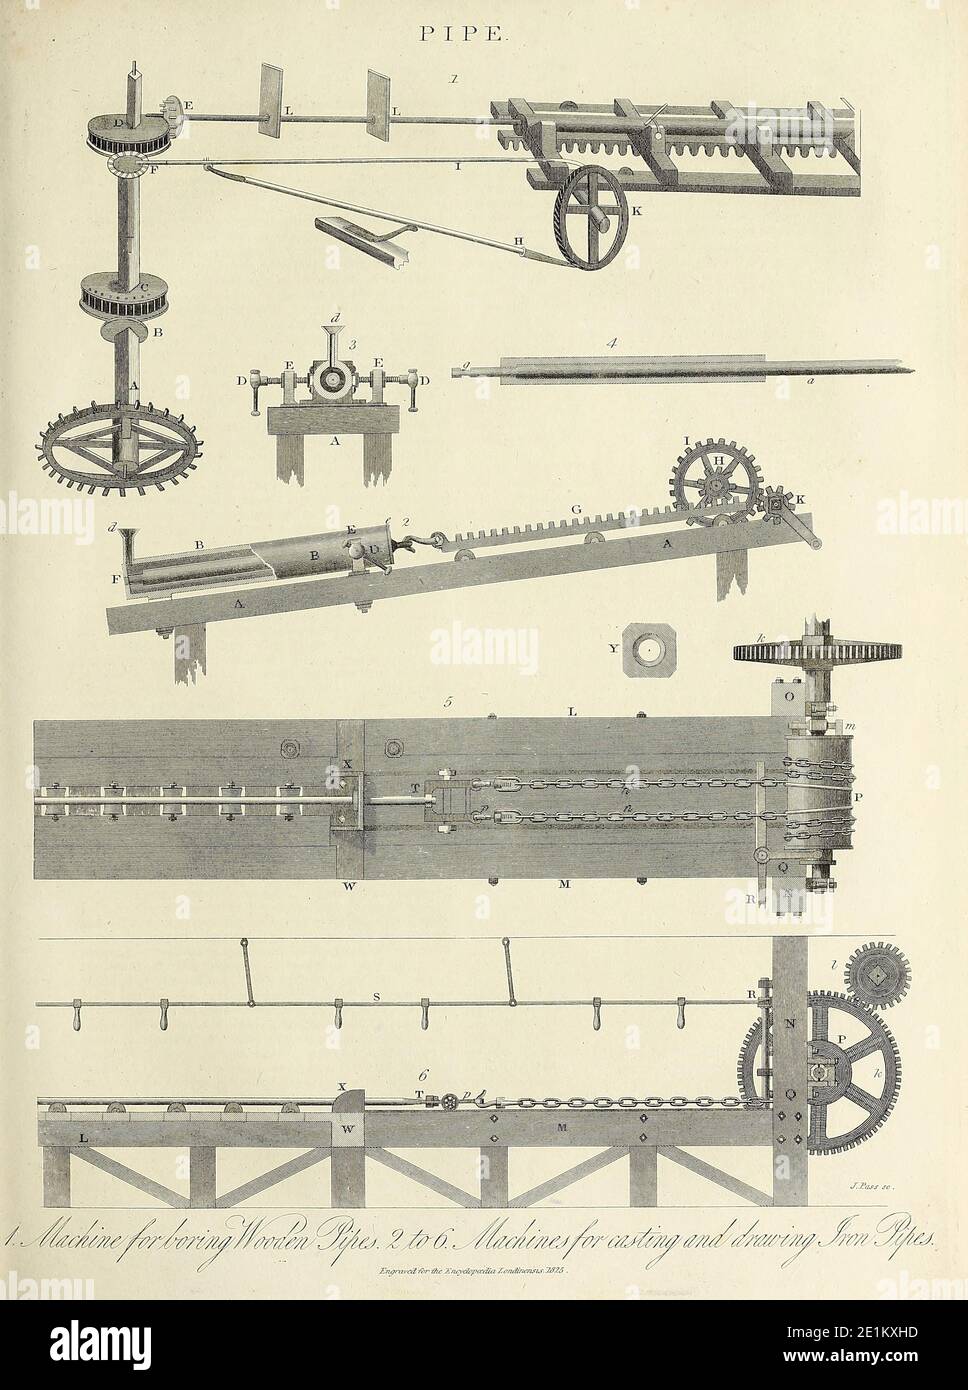 Machine for boring wooden pipes and casting and drawing iron pipes Copperplate engraving From the Encyclopaedia Londinensis or, Universal dictionary of arts, sciences, and literature; Volume XX;  Edited by Wilkes, John. Published in London in 1825 Stock Photo